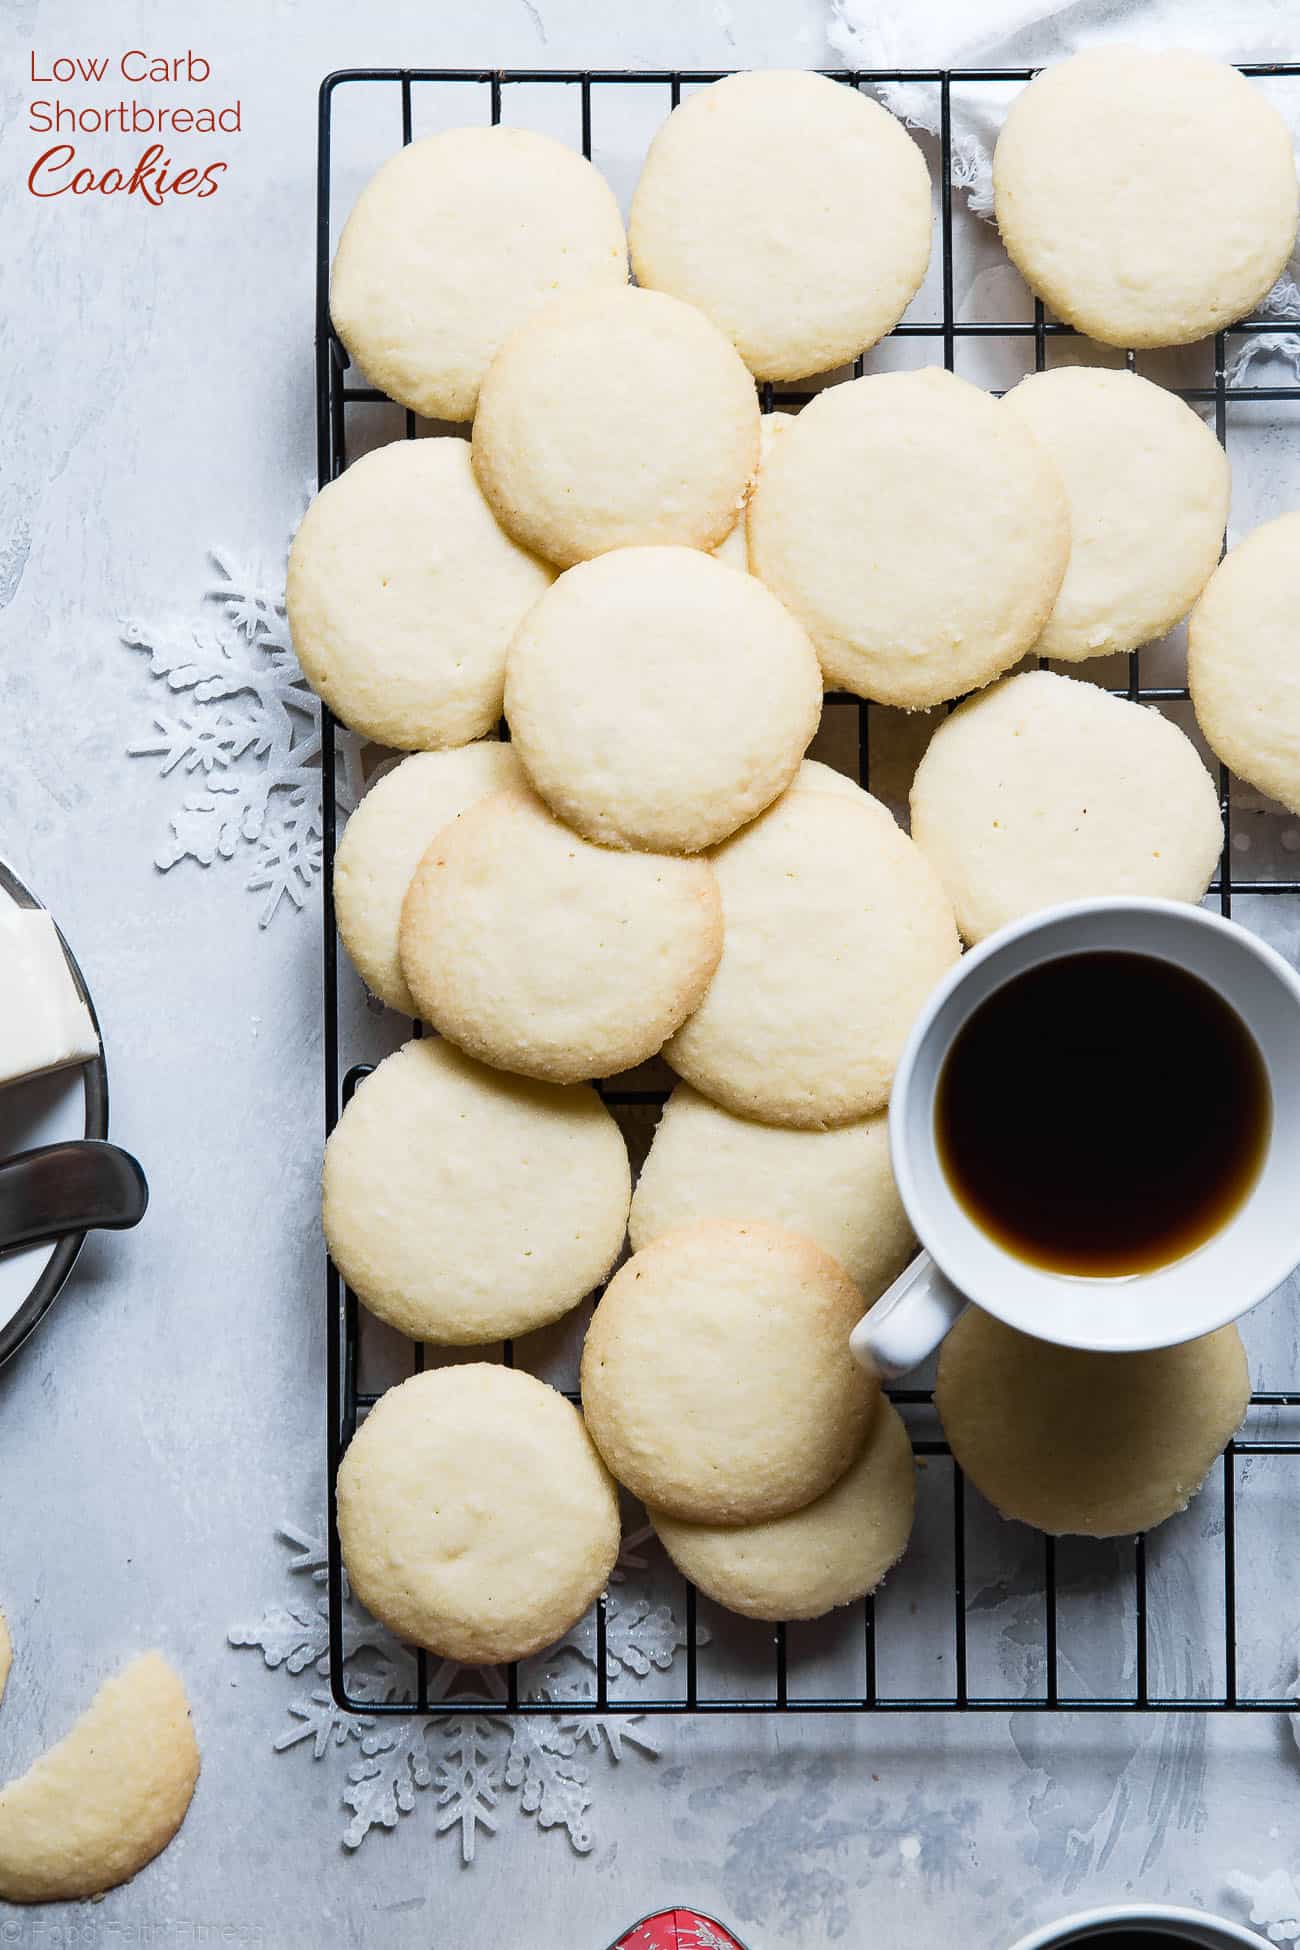 Paleo Whipped Gluten Free Shortbread Cookies - These easy shortbread cookies actually melt in your mouth and are only 60 calories! They're secretly sugar free, healthy and vegan/keto friendly too! | Foodfaithfitness.com | @FoodFaithFit